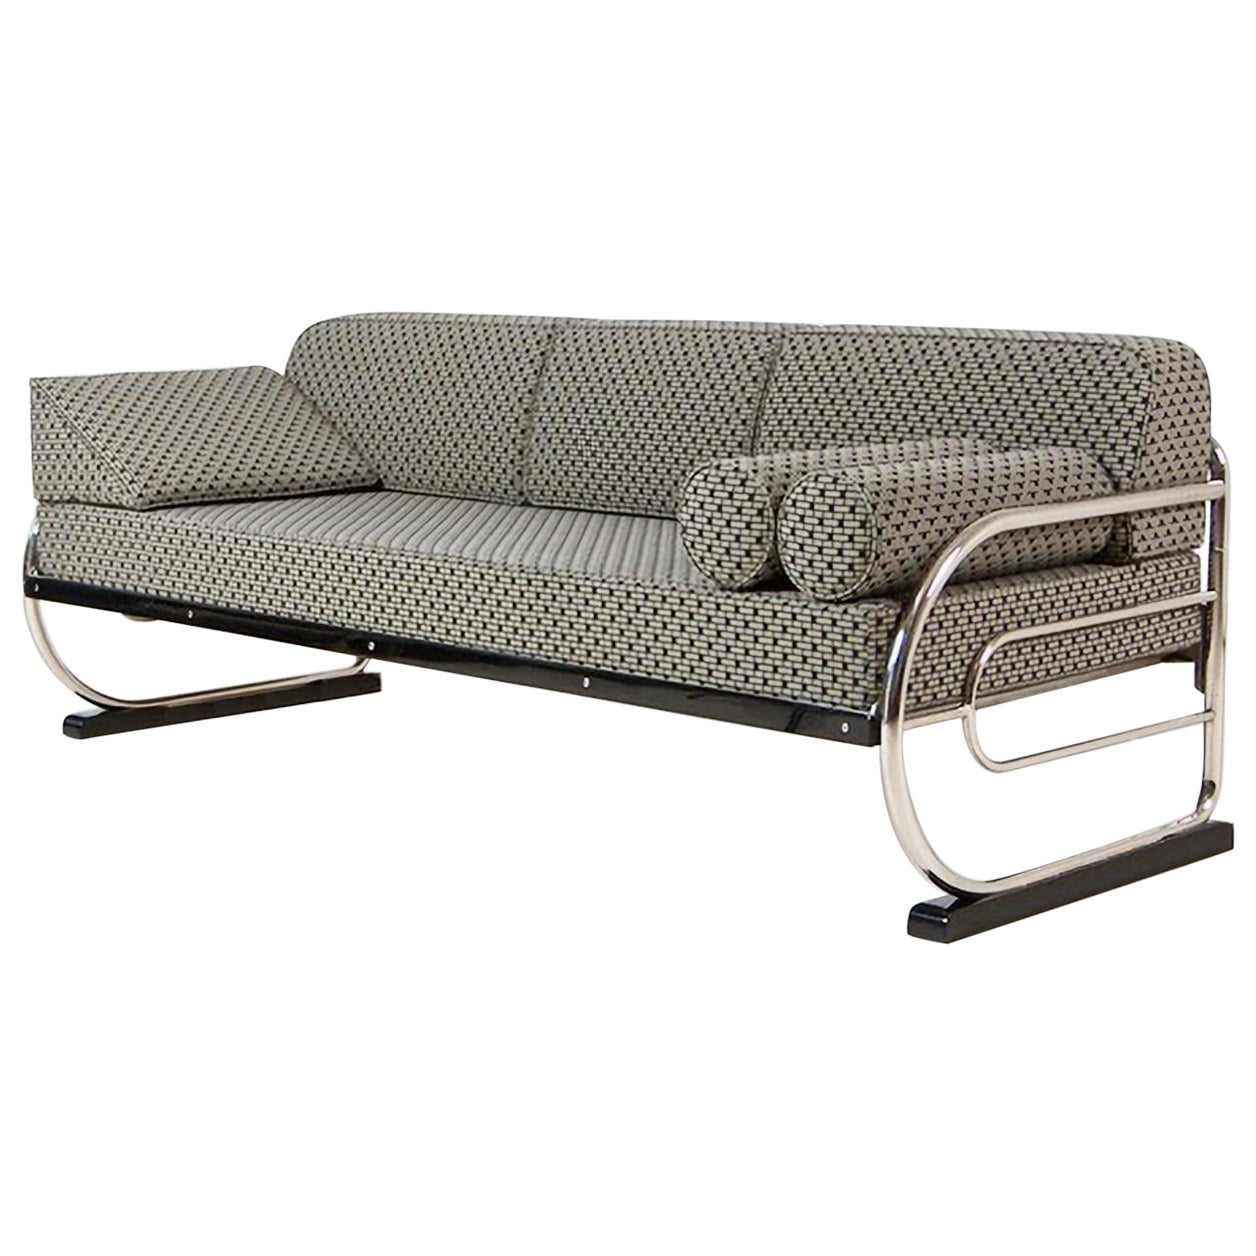 Modernist Tubular Steel Couch/ Daybed, Chromed Metal, Fabric Upholstery, c. 1930